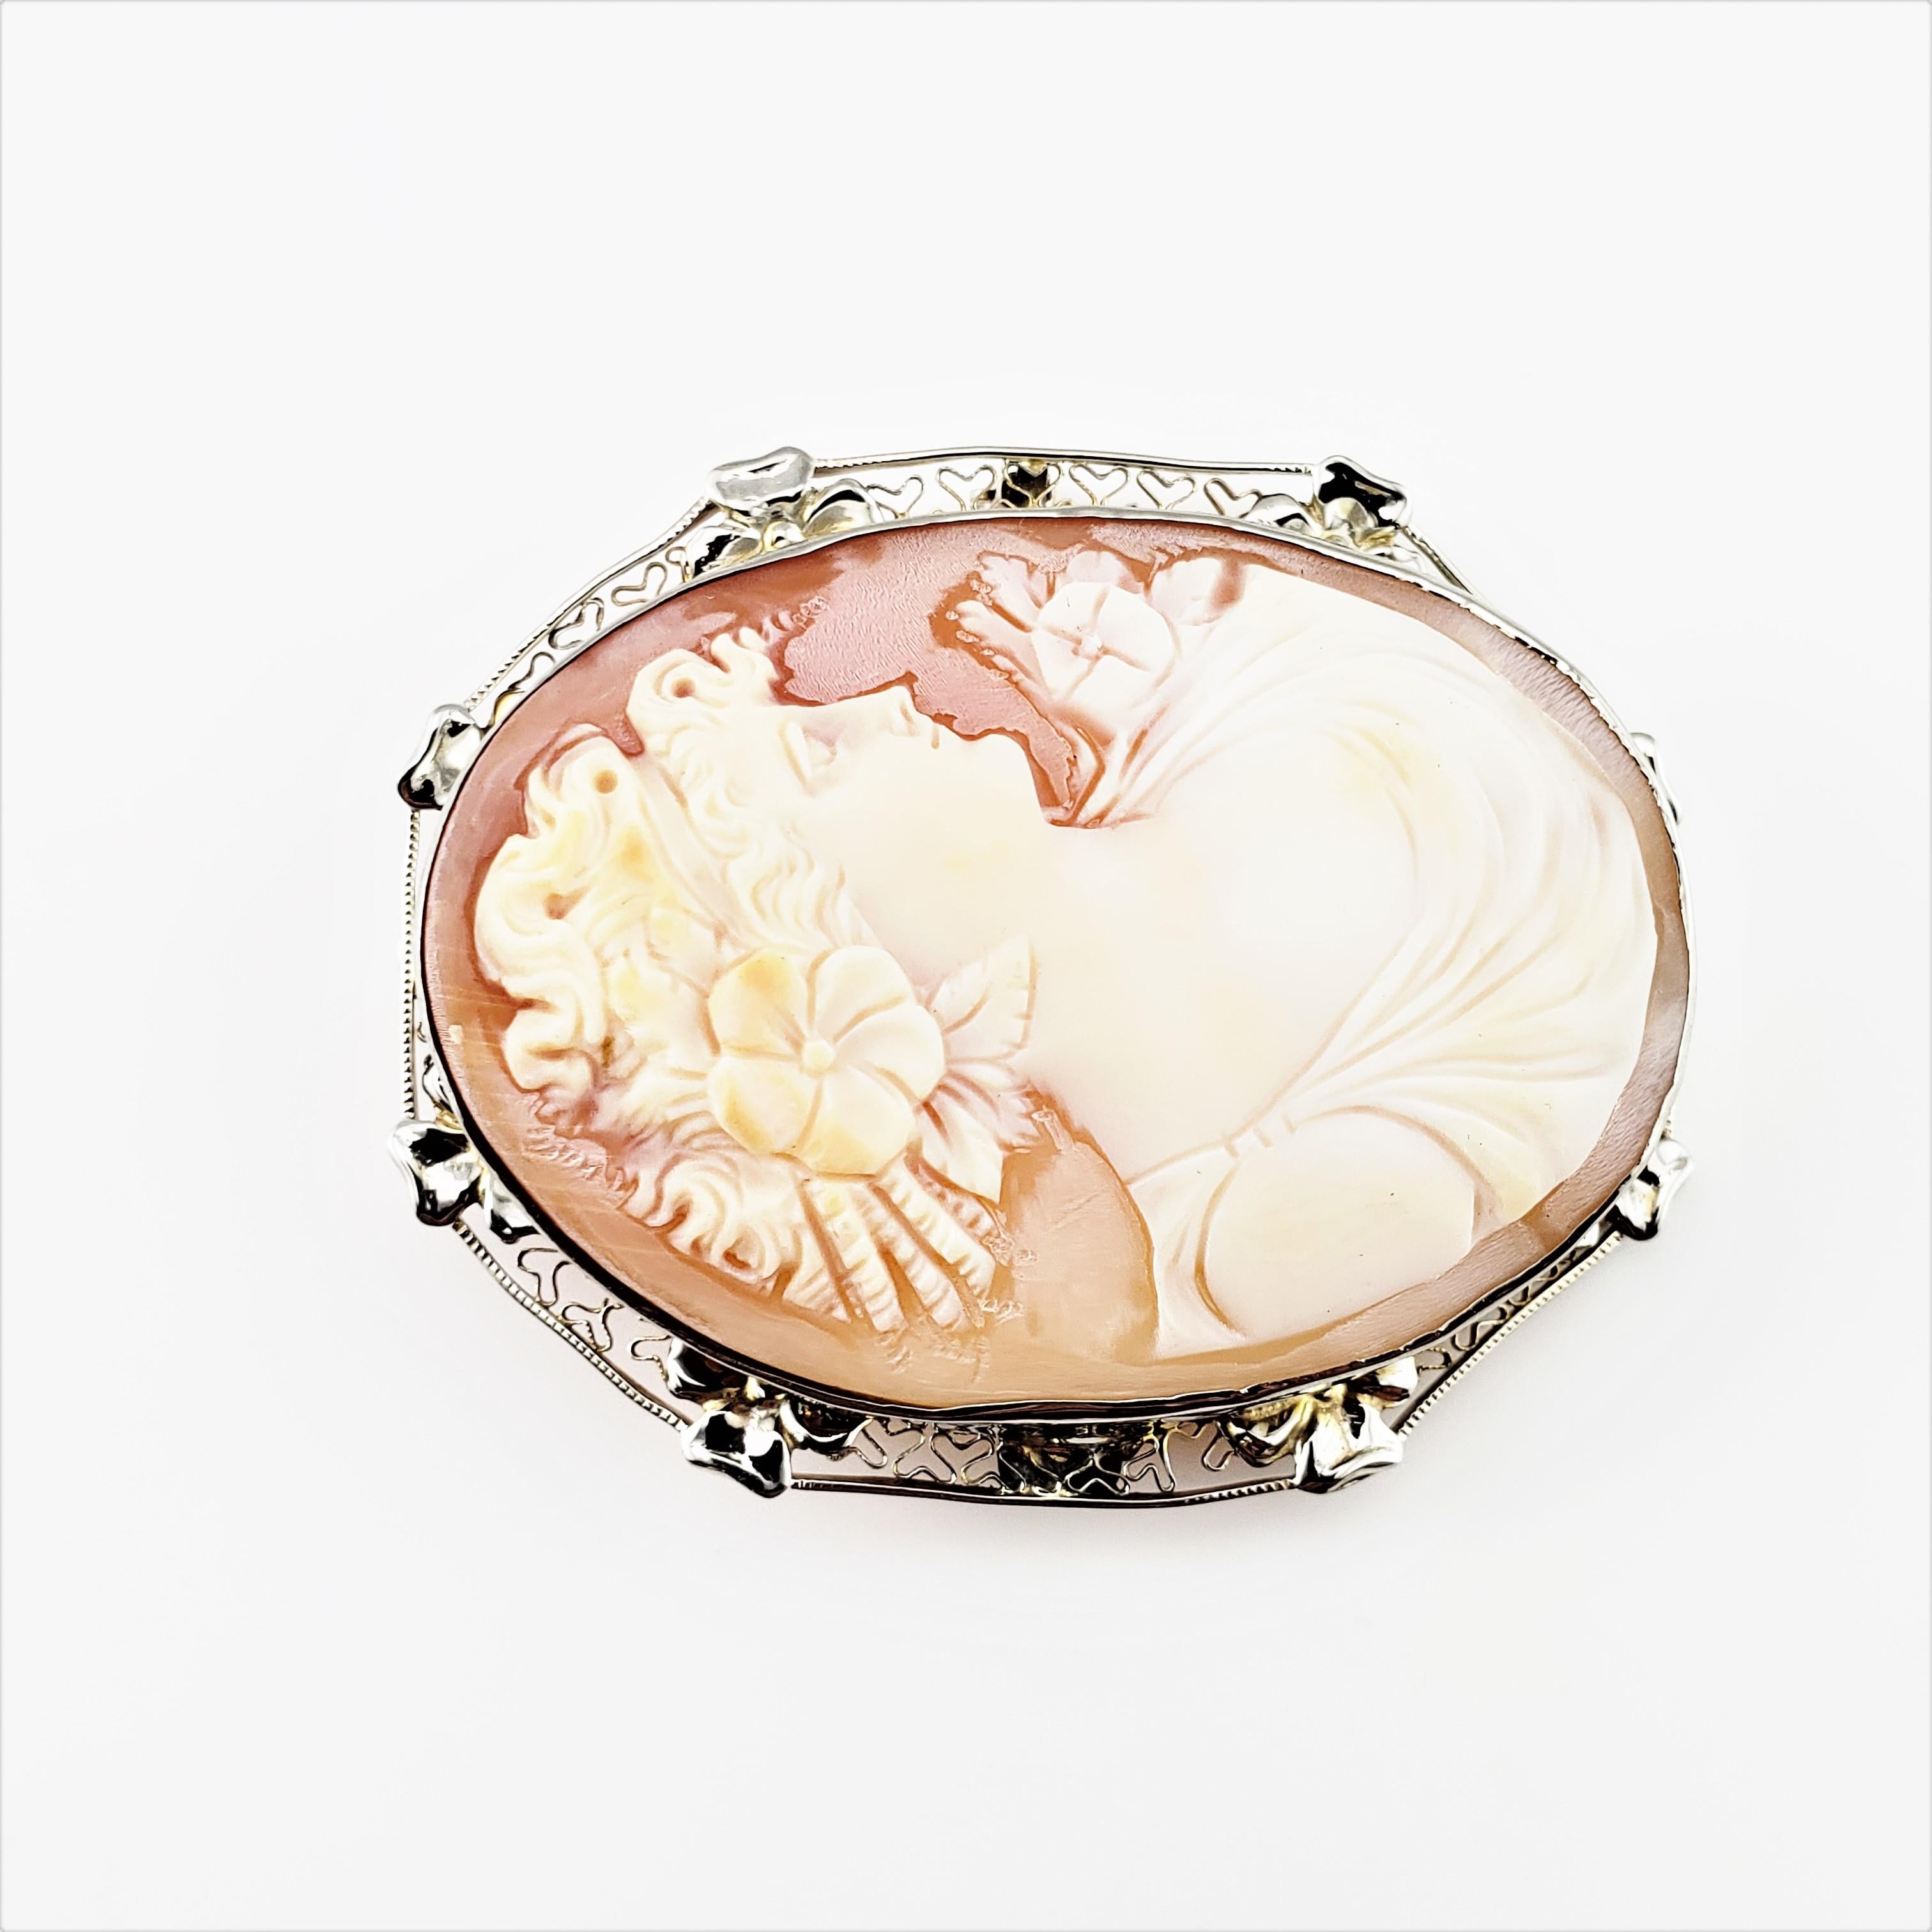 Women's or Men's 14 Karat Yellow and White Gold Cameo Brooch/Pendant For Sale